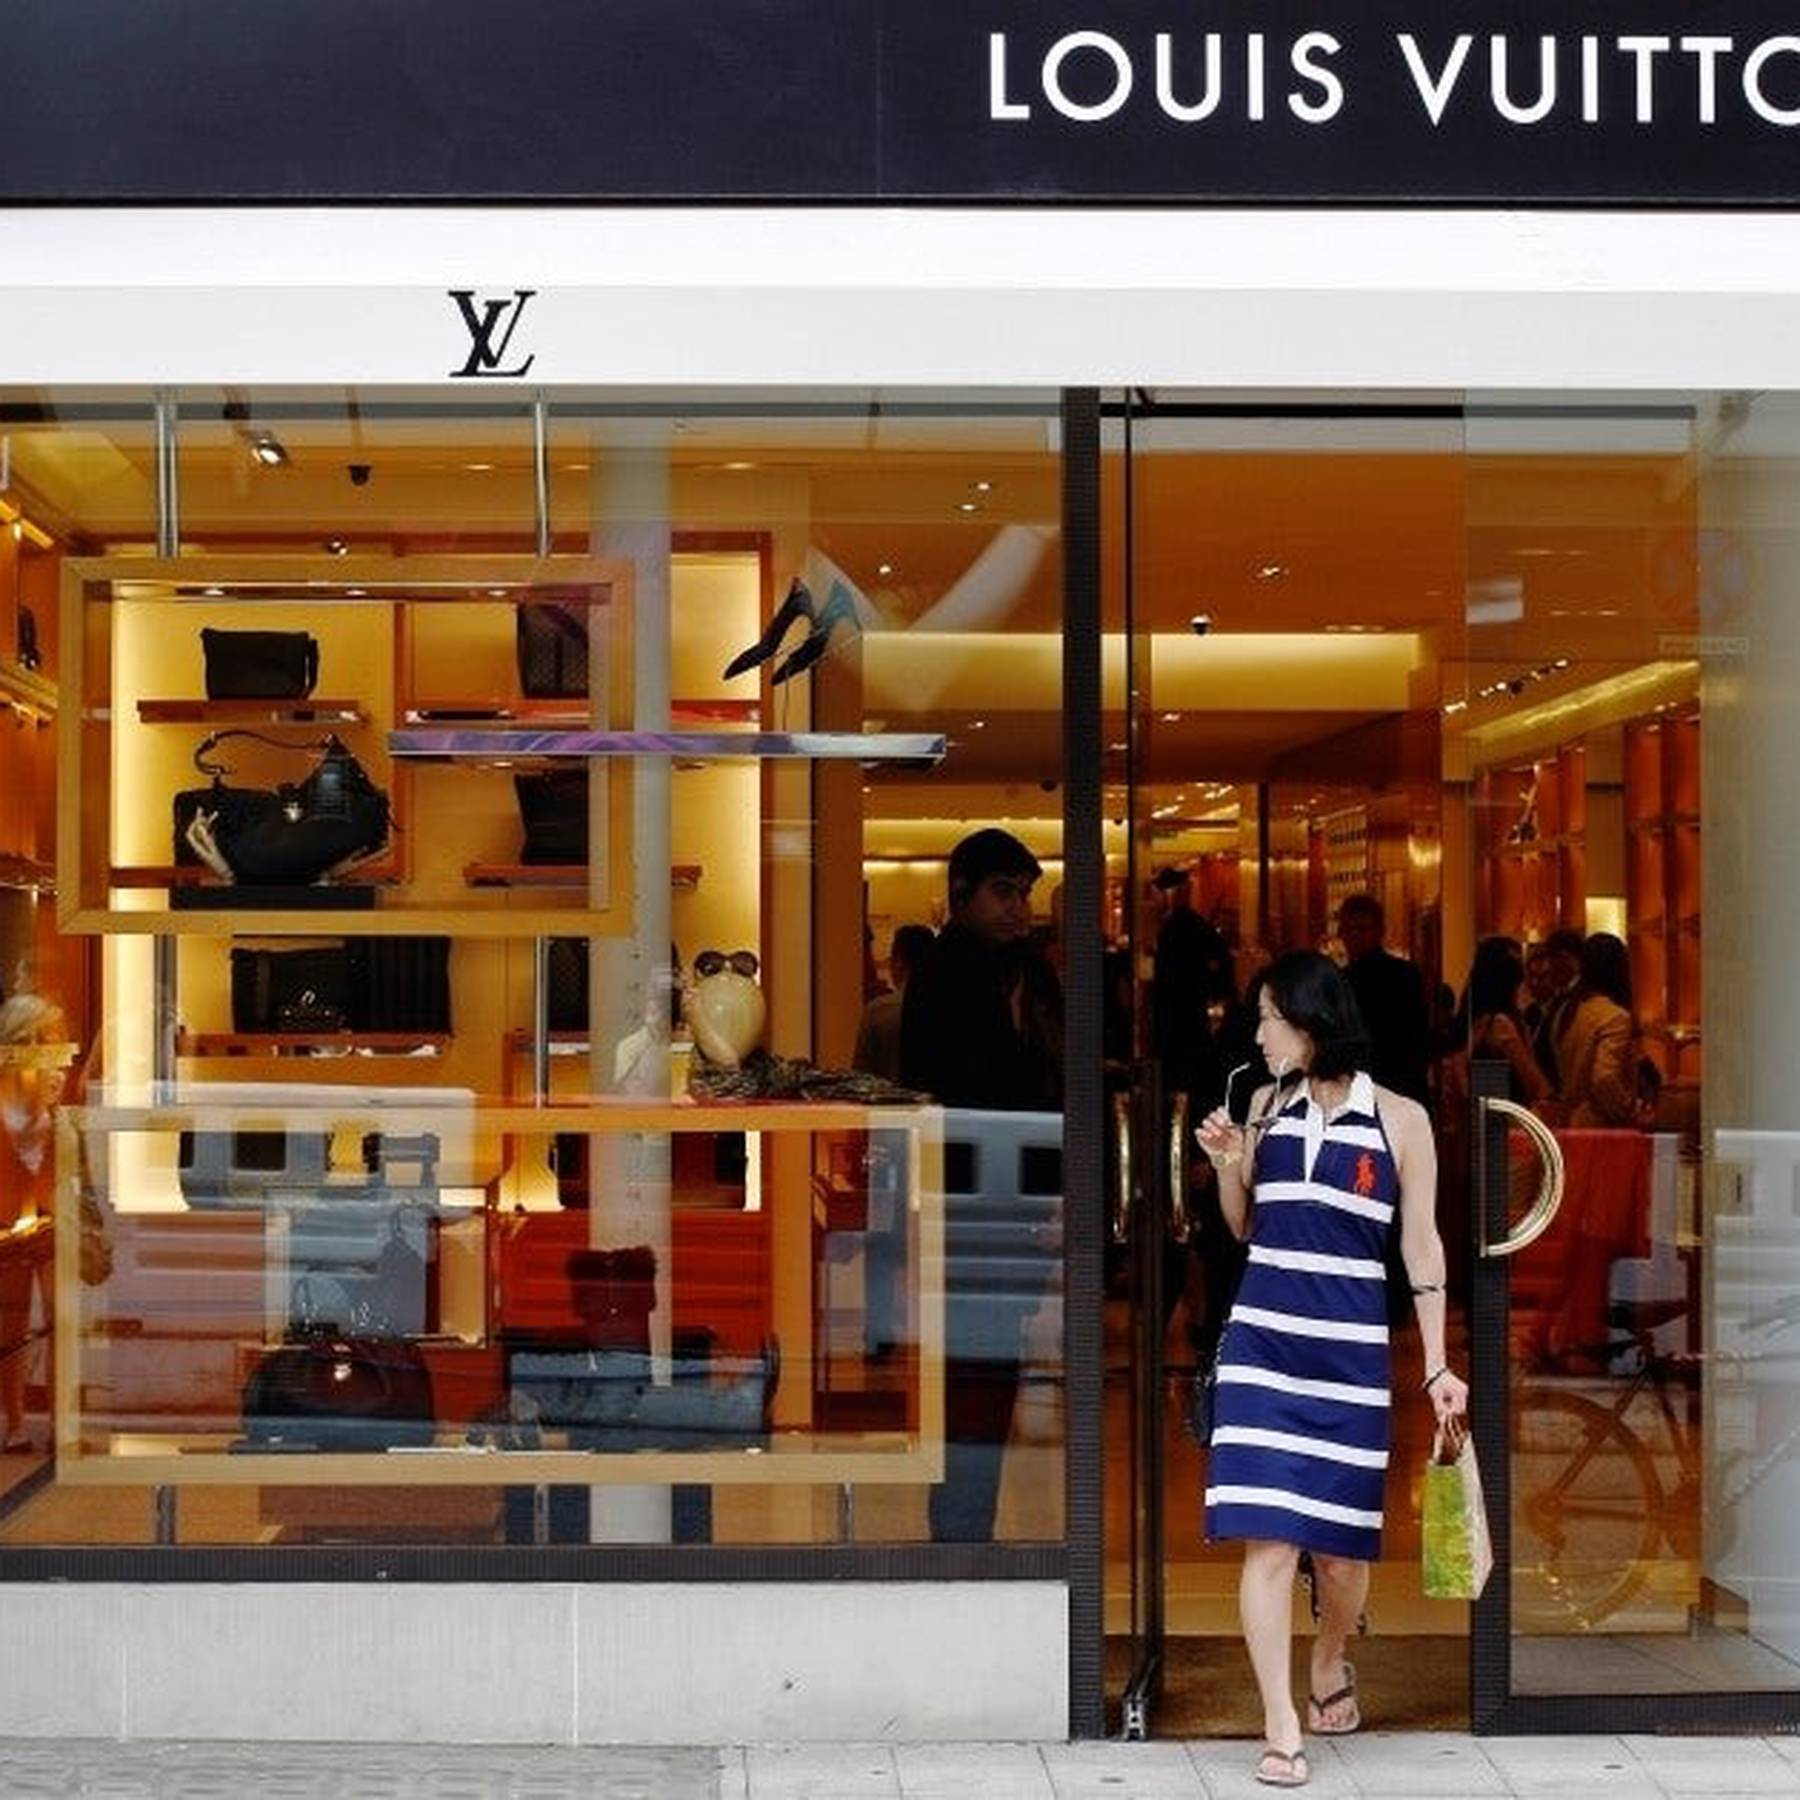 Louis Vuitton Investigates Counterfeit Selling Allegation in China